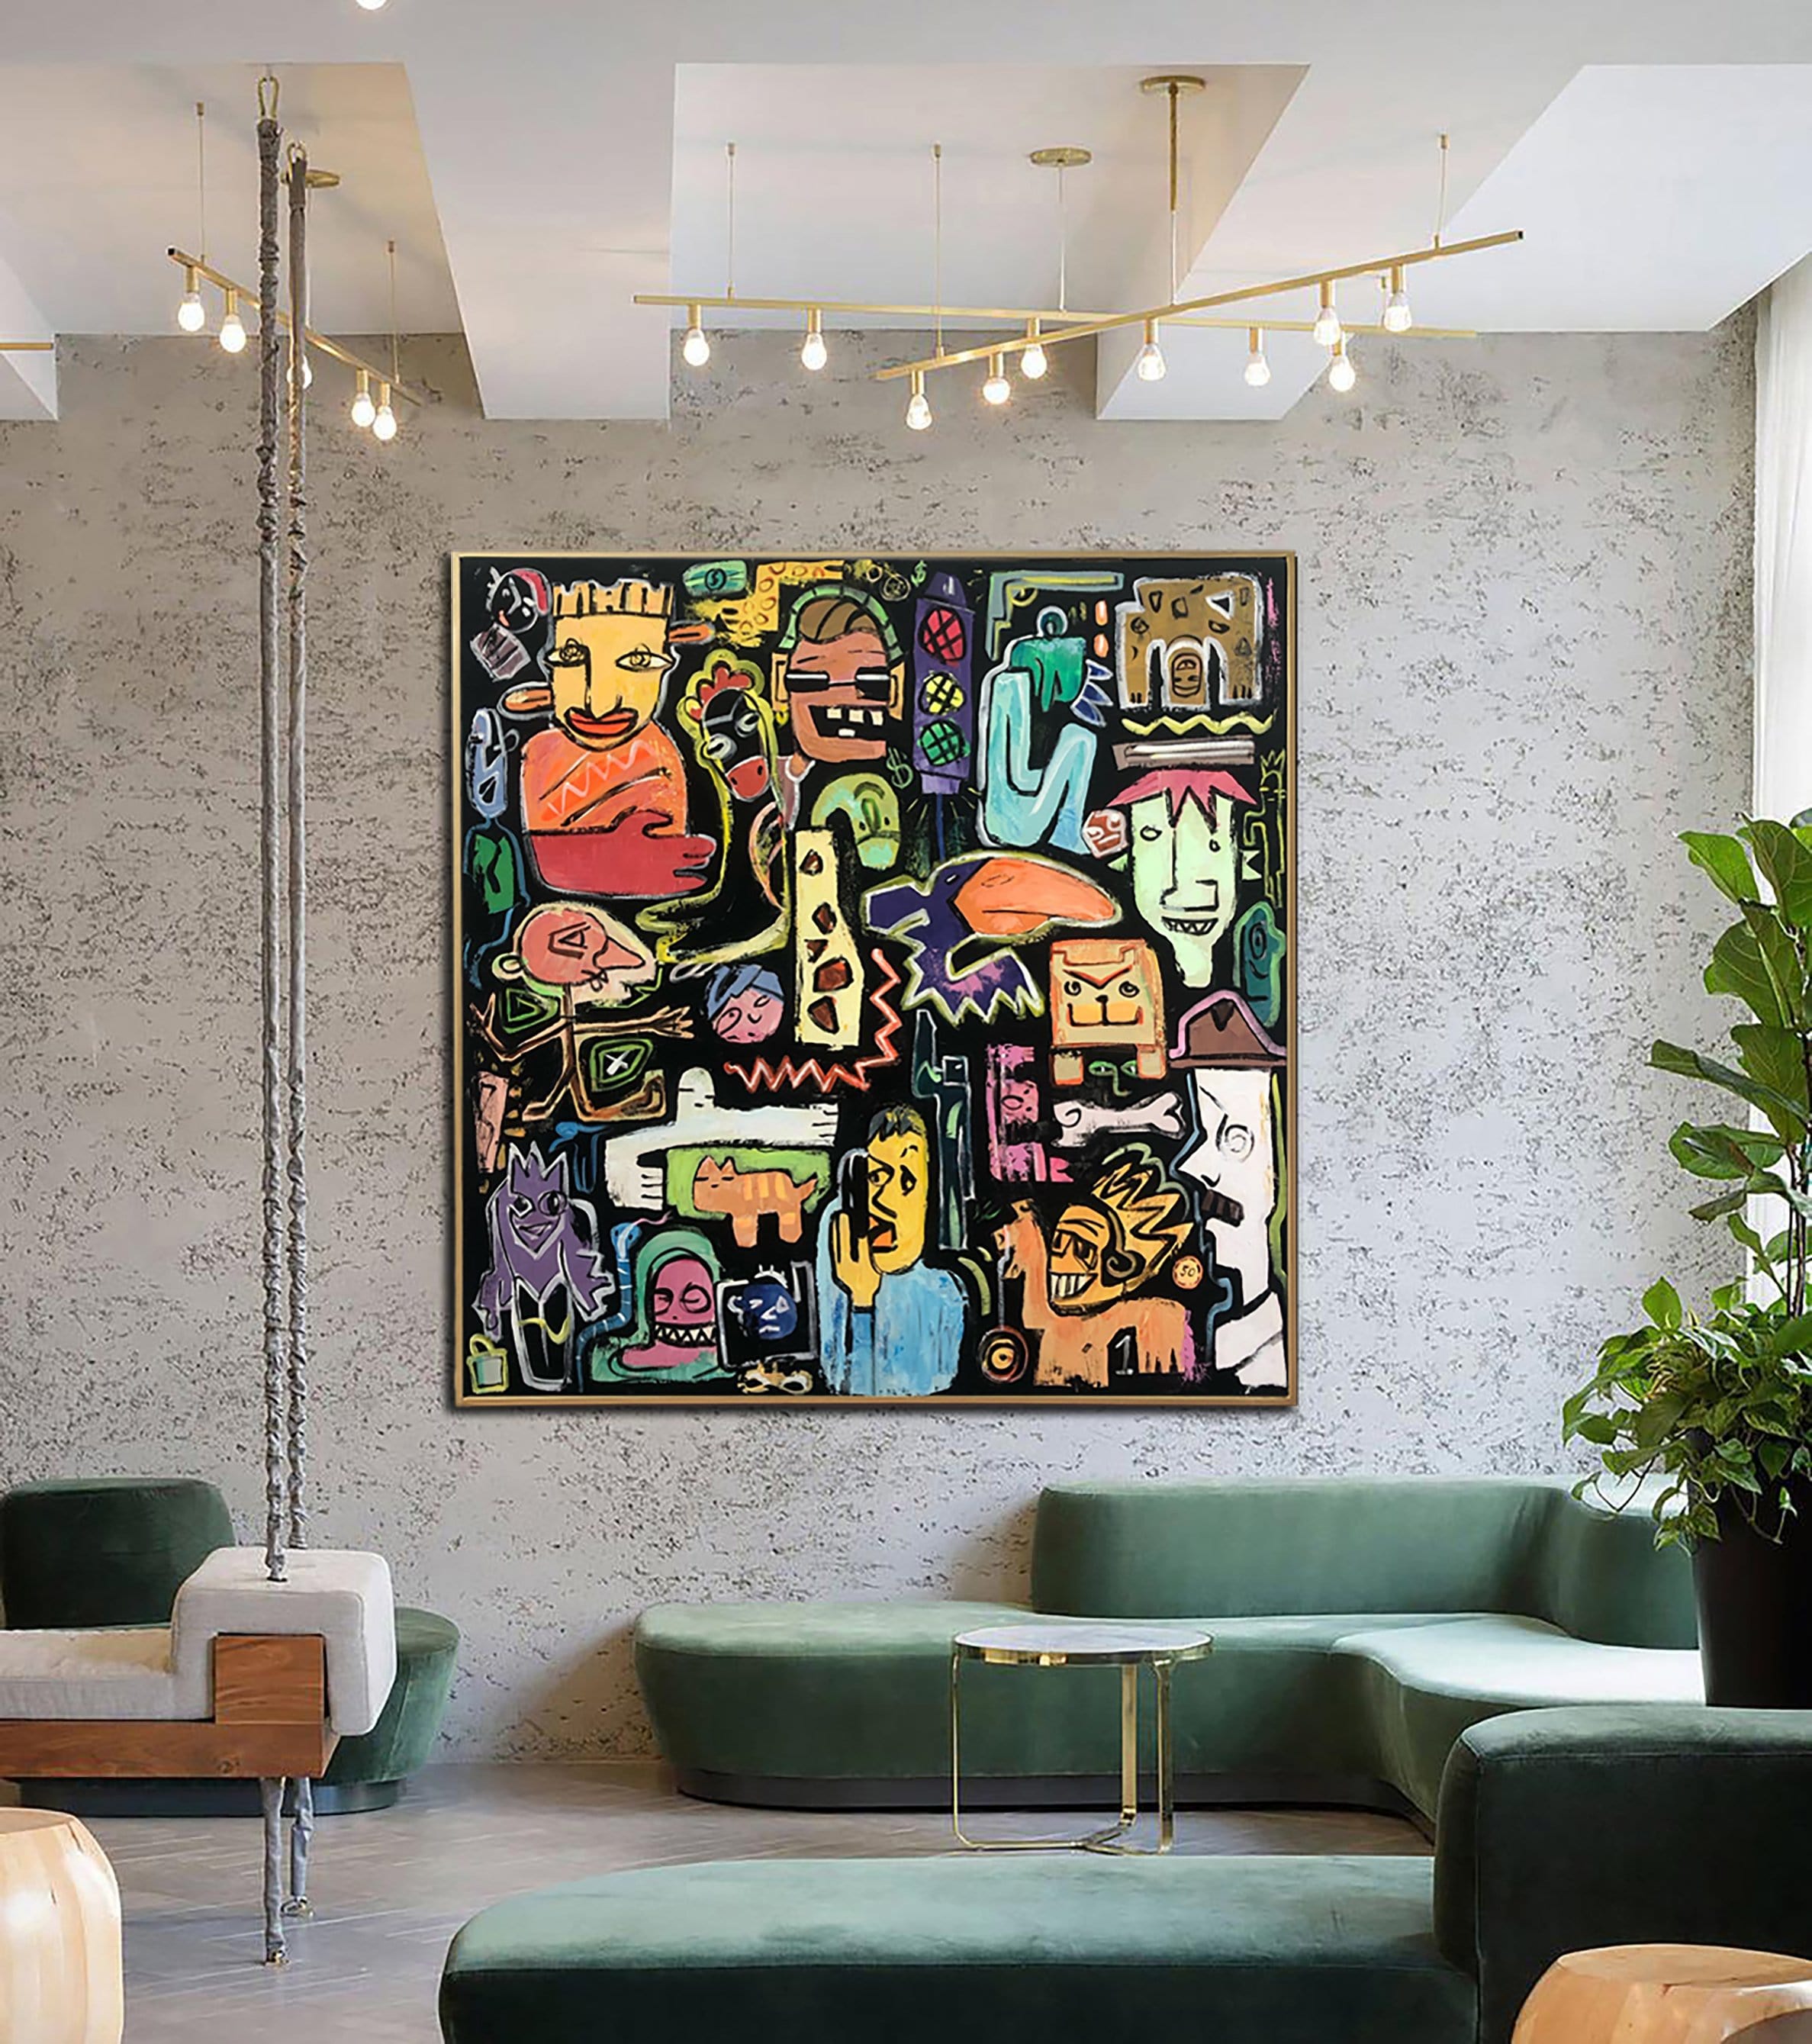 Abstract Colorful Painting Canvas Graffiti Art Contemporary Street Art